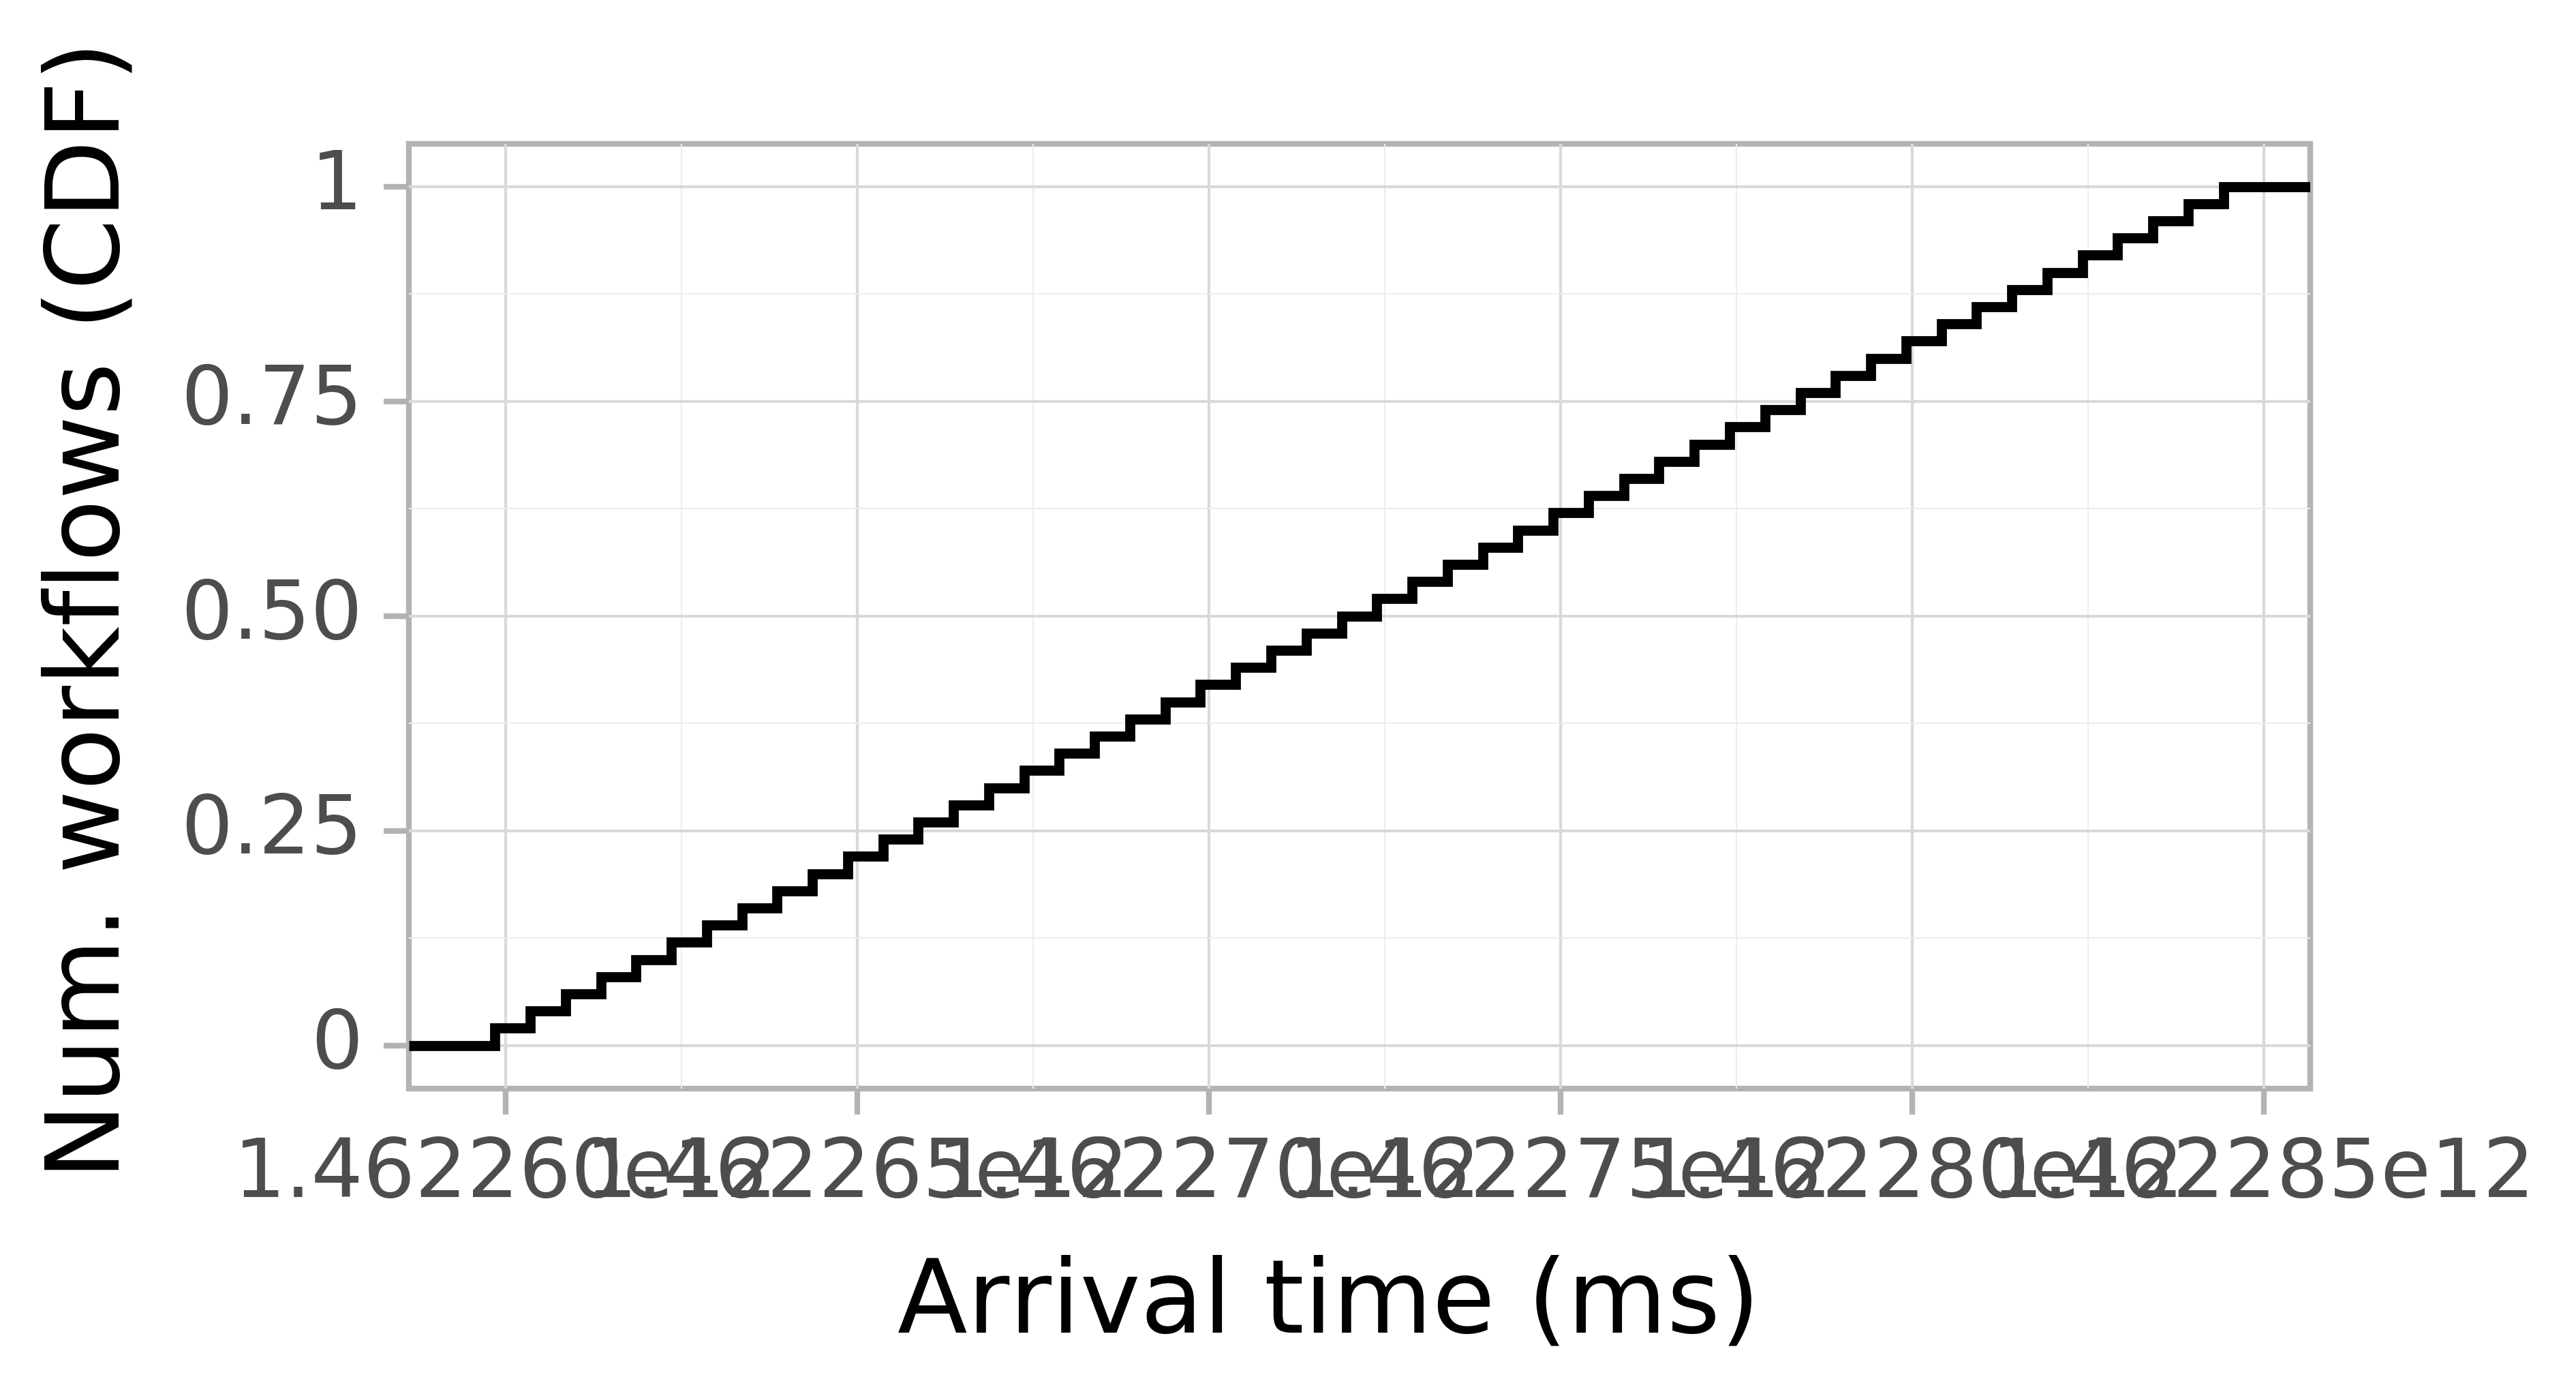 Job arrival CDF graph for the askalon-new_ee49 trace.